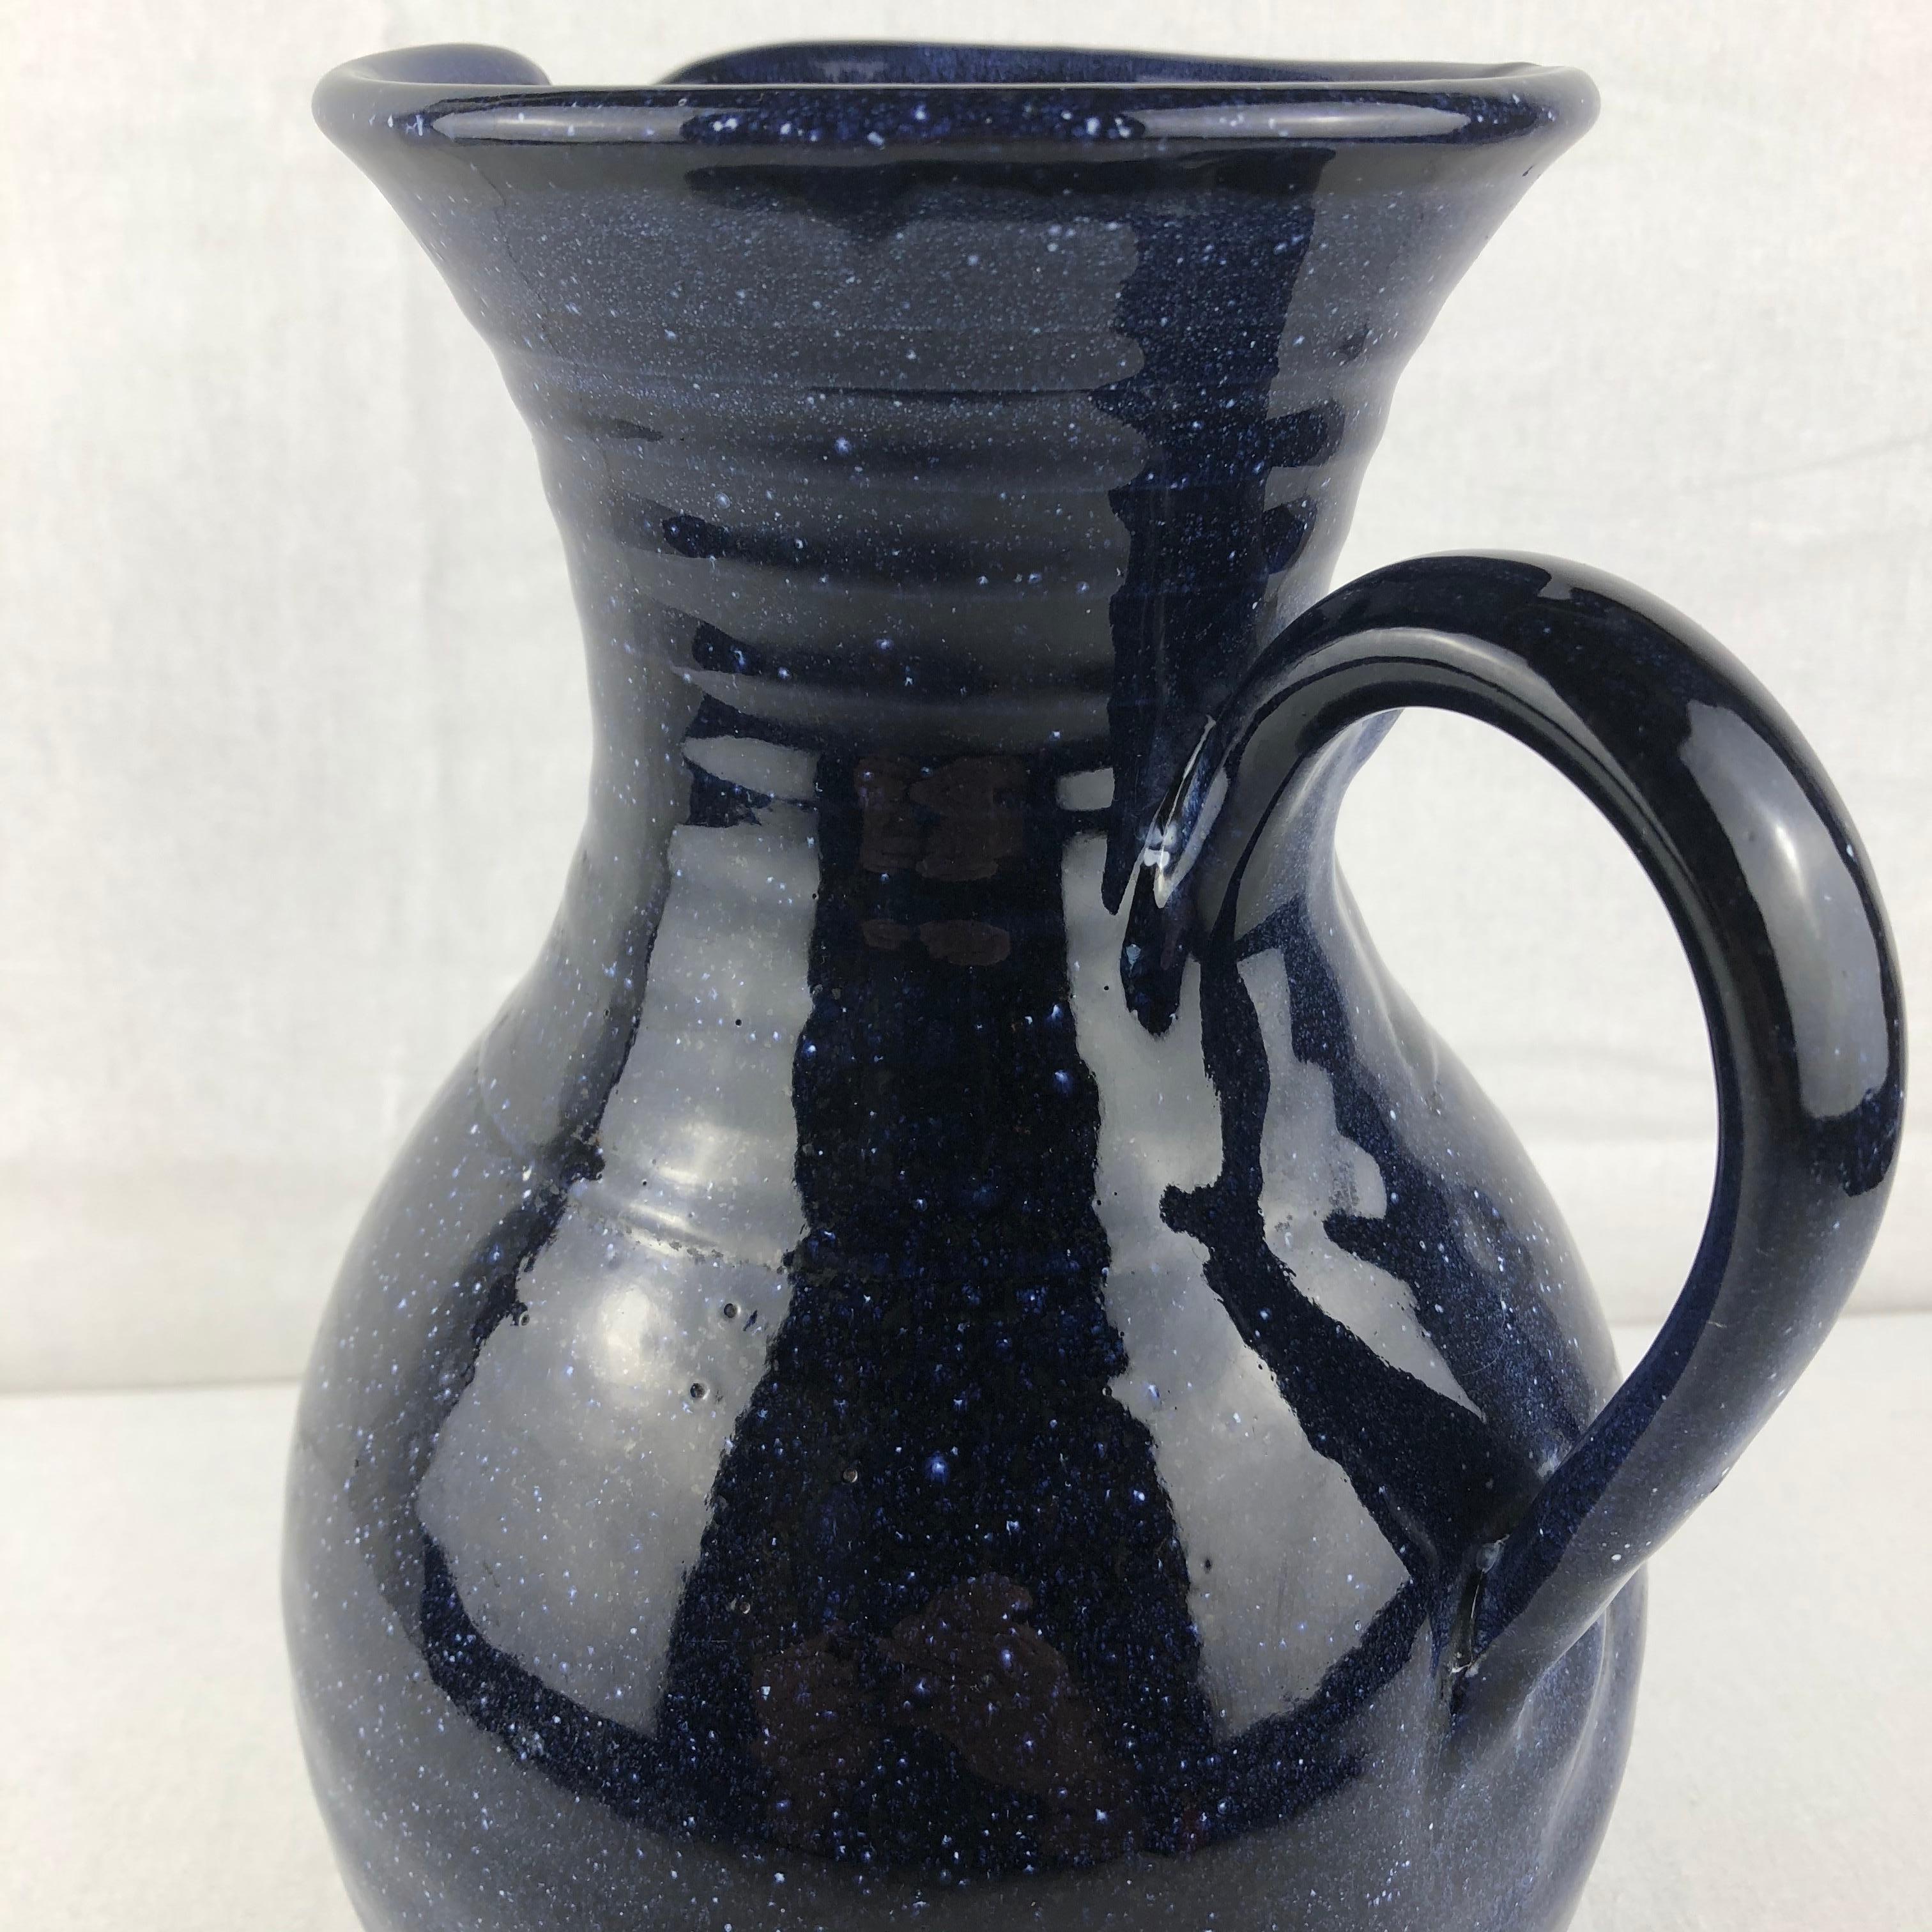 Beautiful hand-crafted mid- 20th Century handled vase or pitcher from Anduze. This eye-catching decorative object is in perfect condition and will enhance any table, countertop or shelf. 

Perfect with almost any color scheme. Color is a dark blue